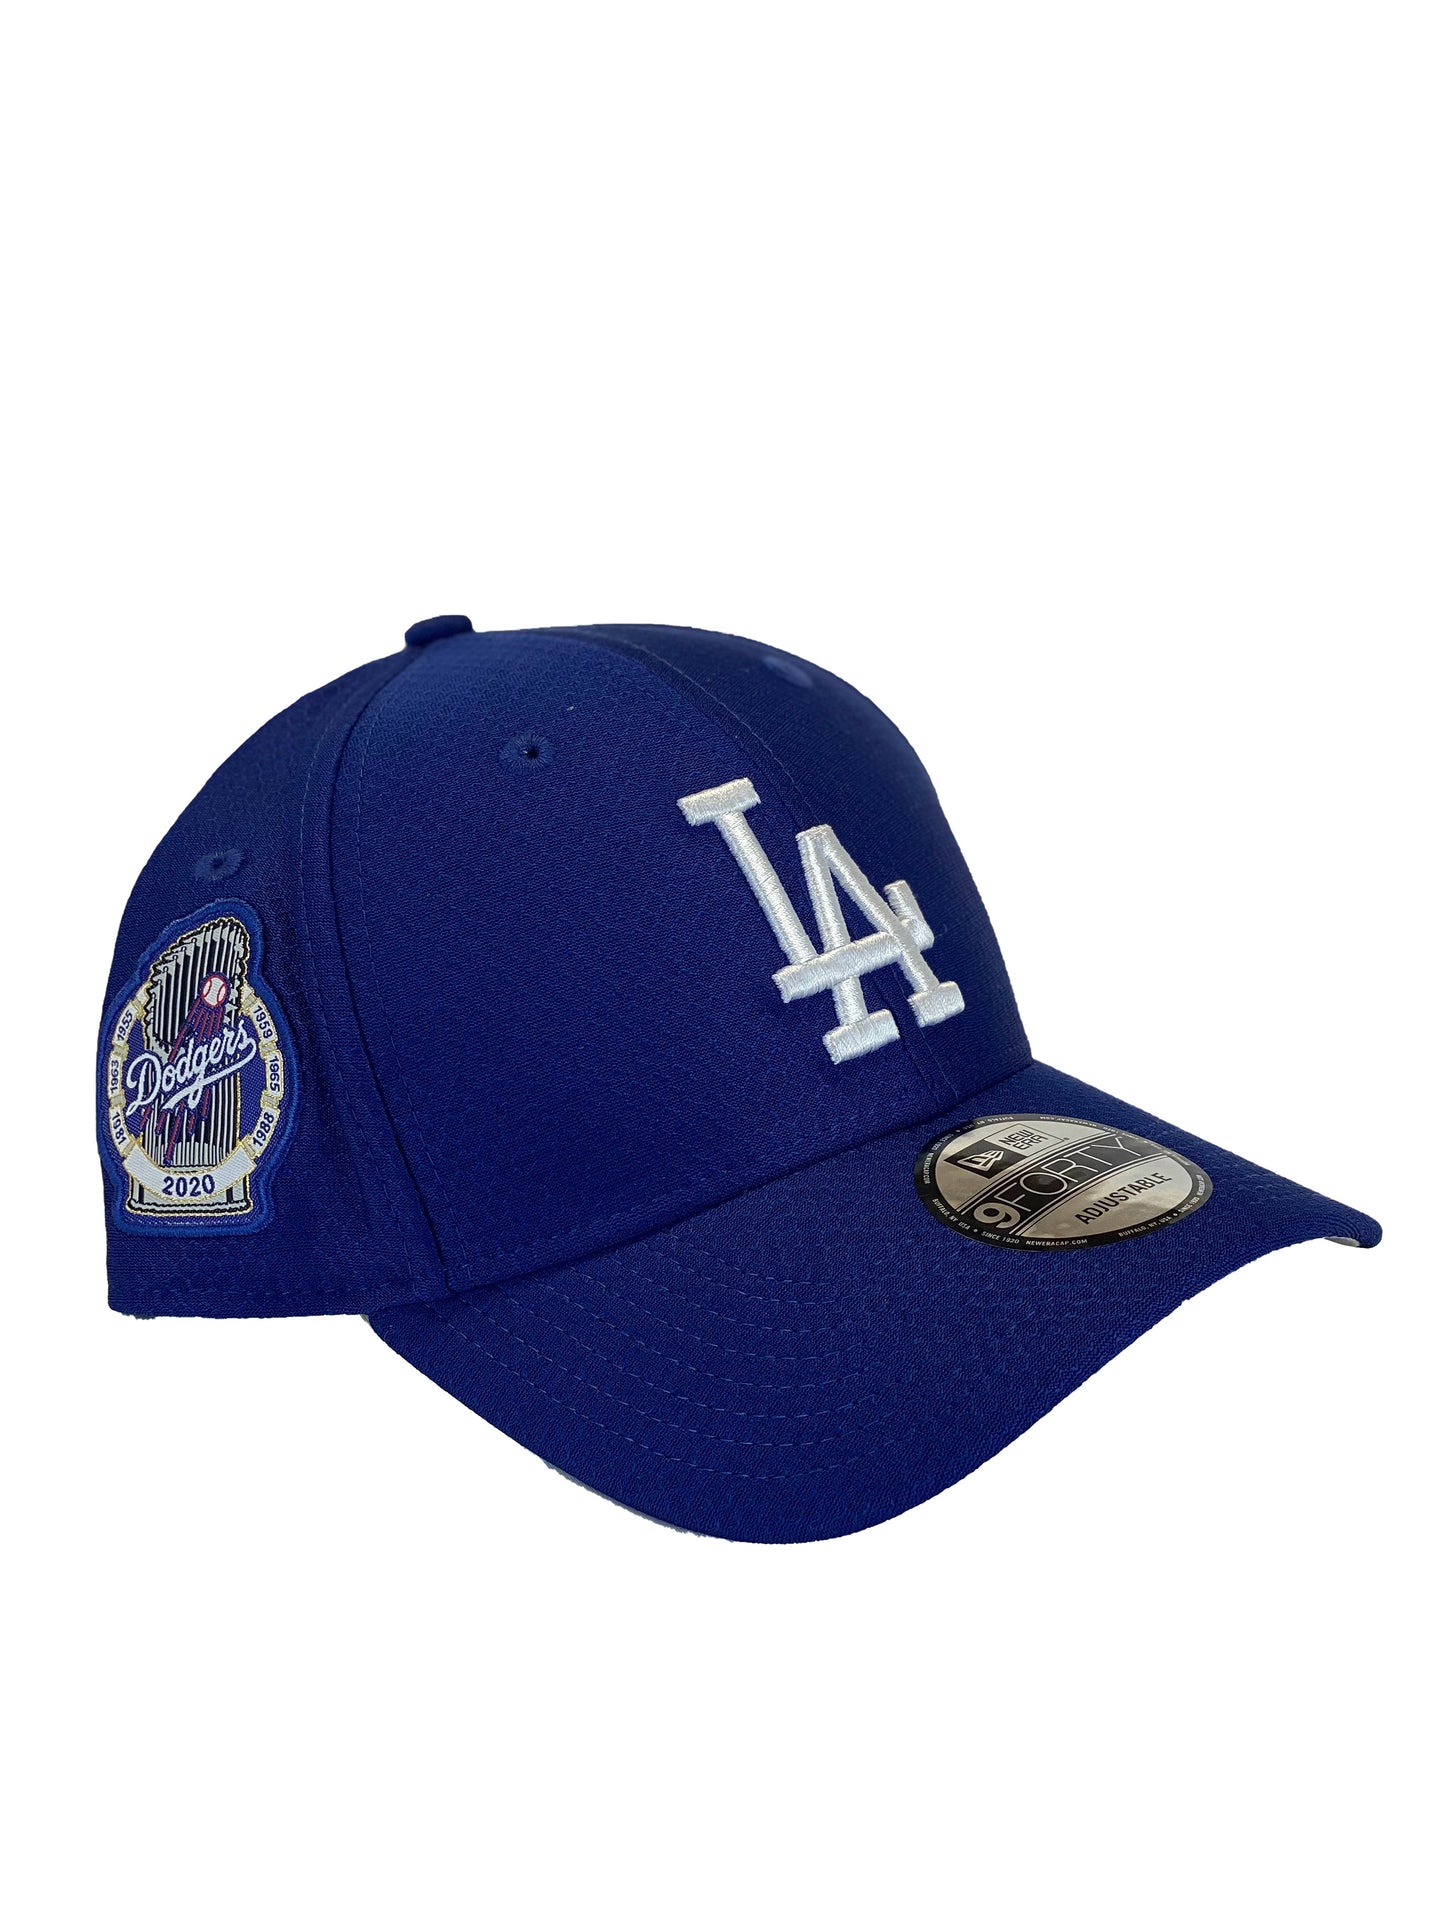 LOS ANGELES DODGERS GLORY 9FORTY ADJUSTABLE